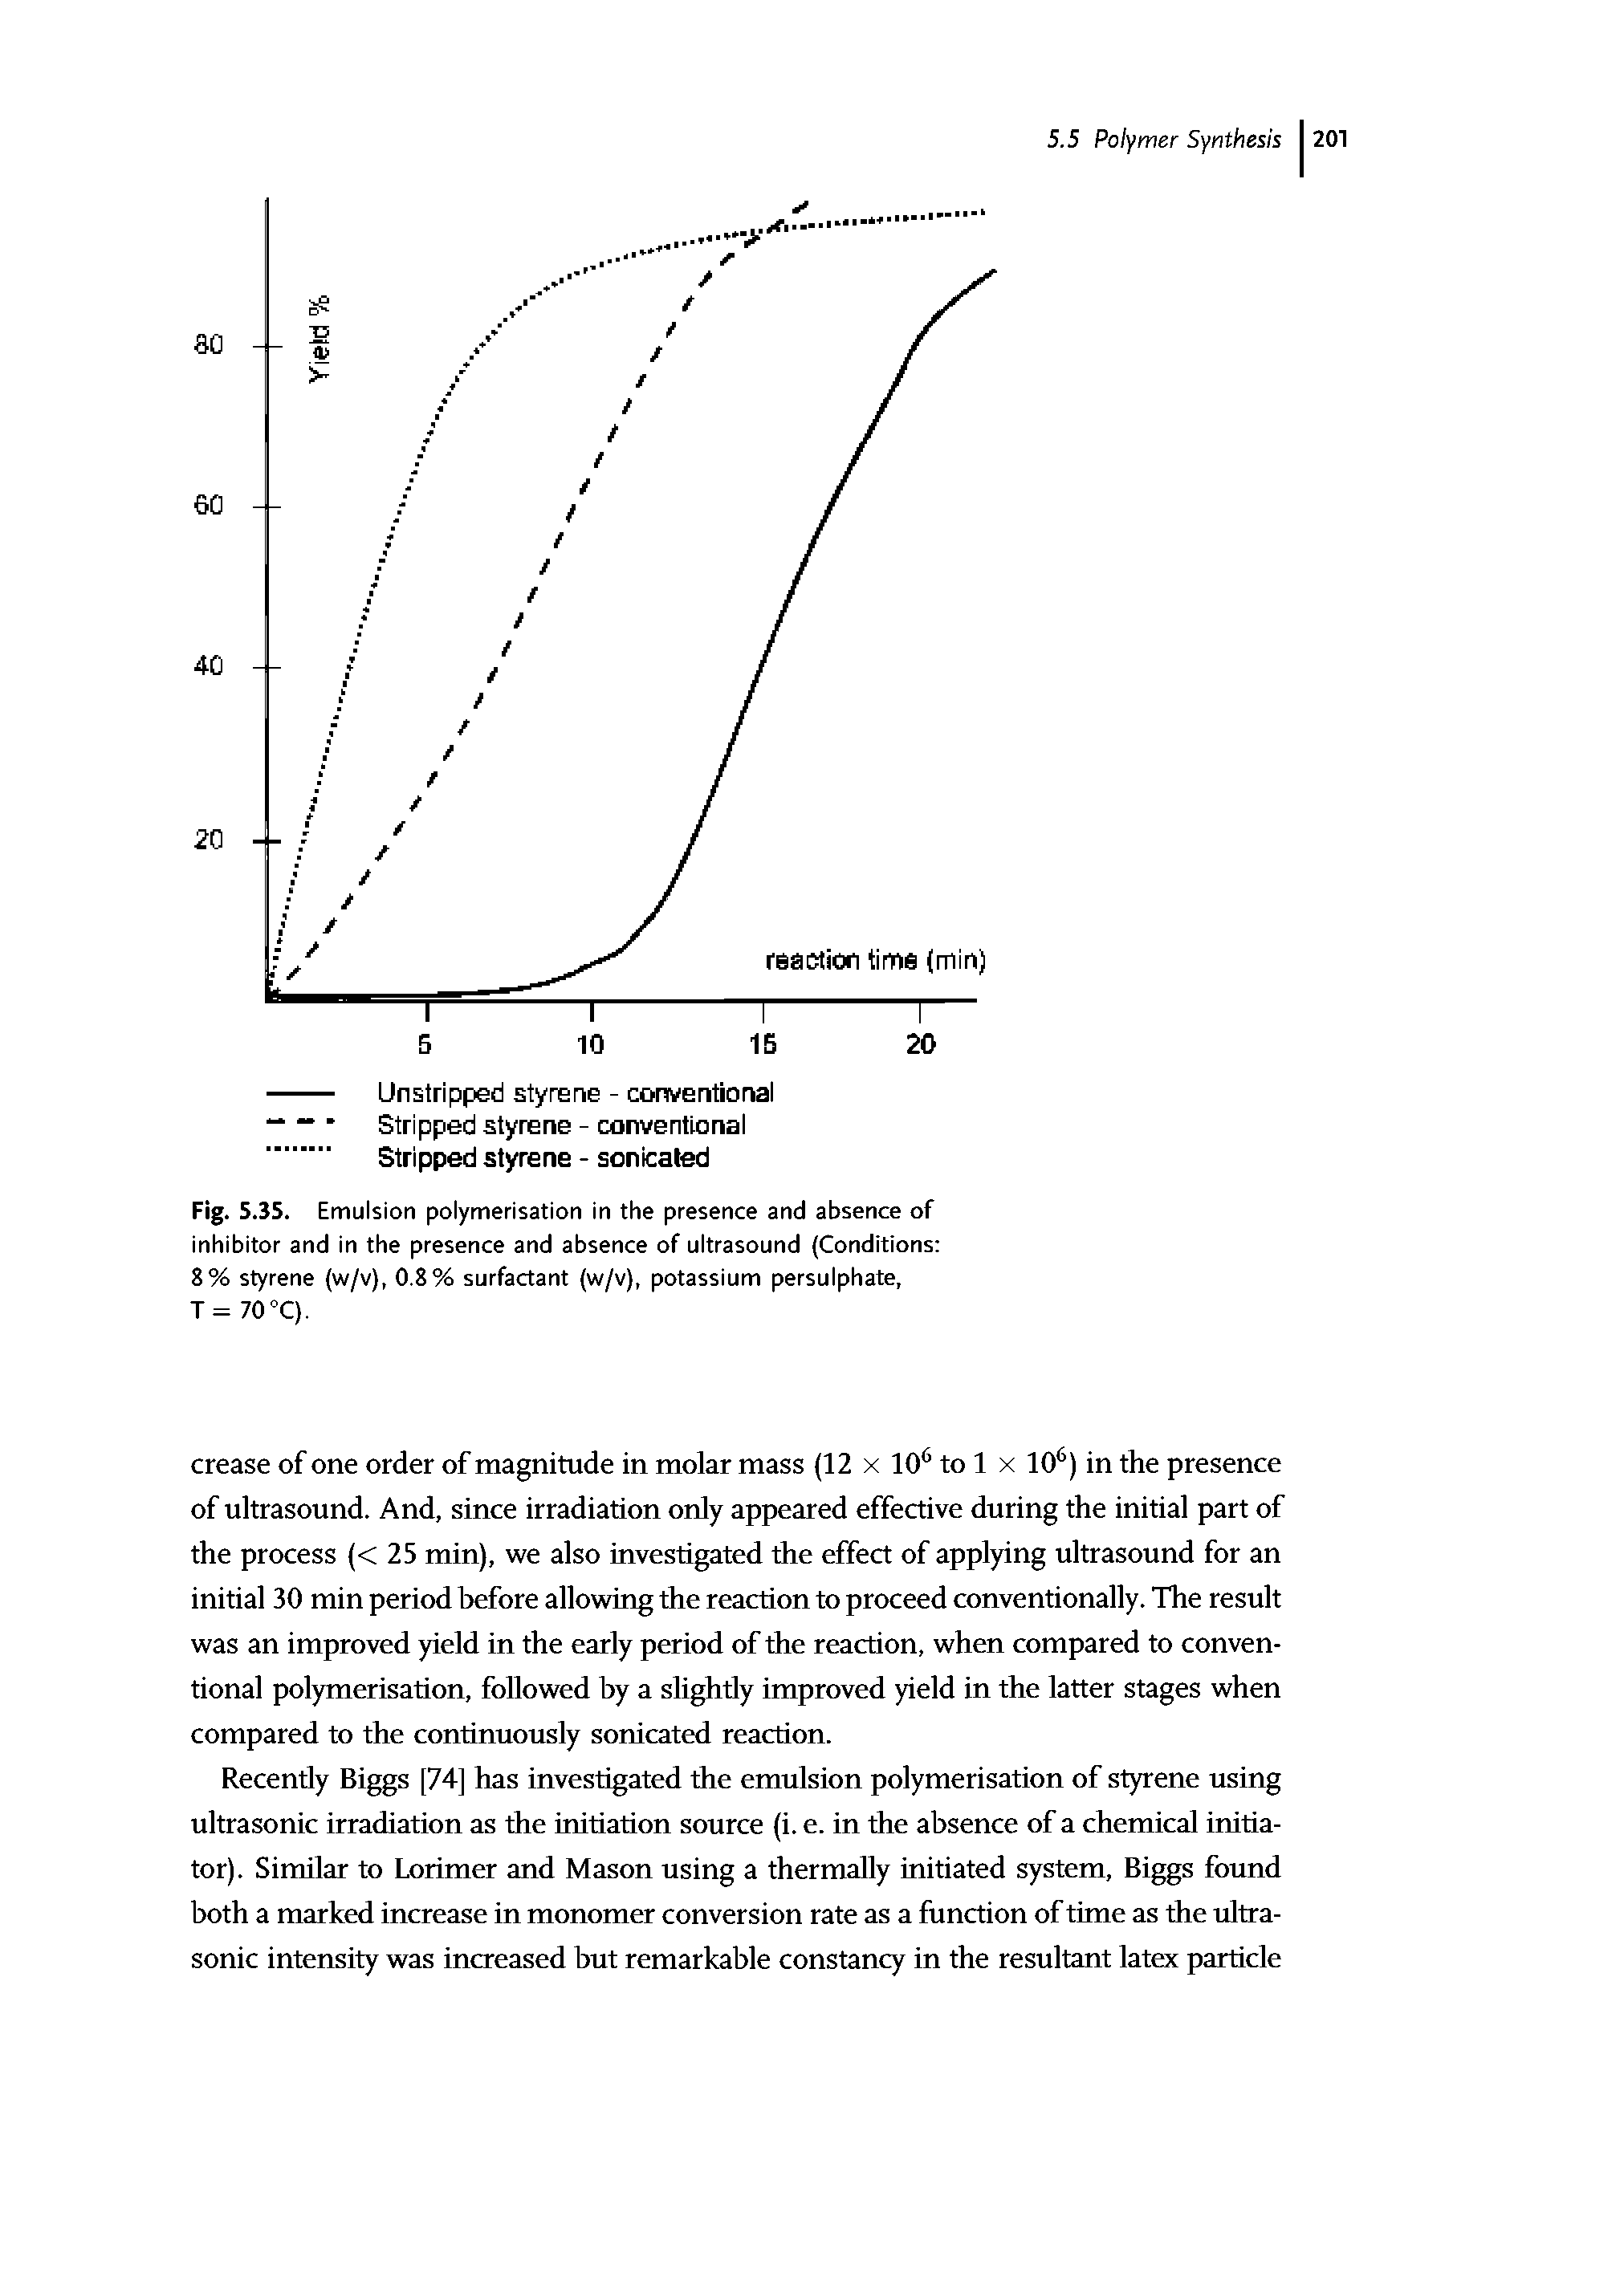 Fig. 5.35. Emulsion polymerisation in the presence and absence of inhibitor and in the presence and absence of ultrasound (Conditions 8% styrene (w/v), 0.8% surfactant (w/v), potassium persulphate, T= 70°C).